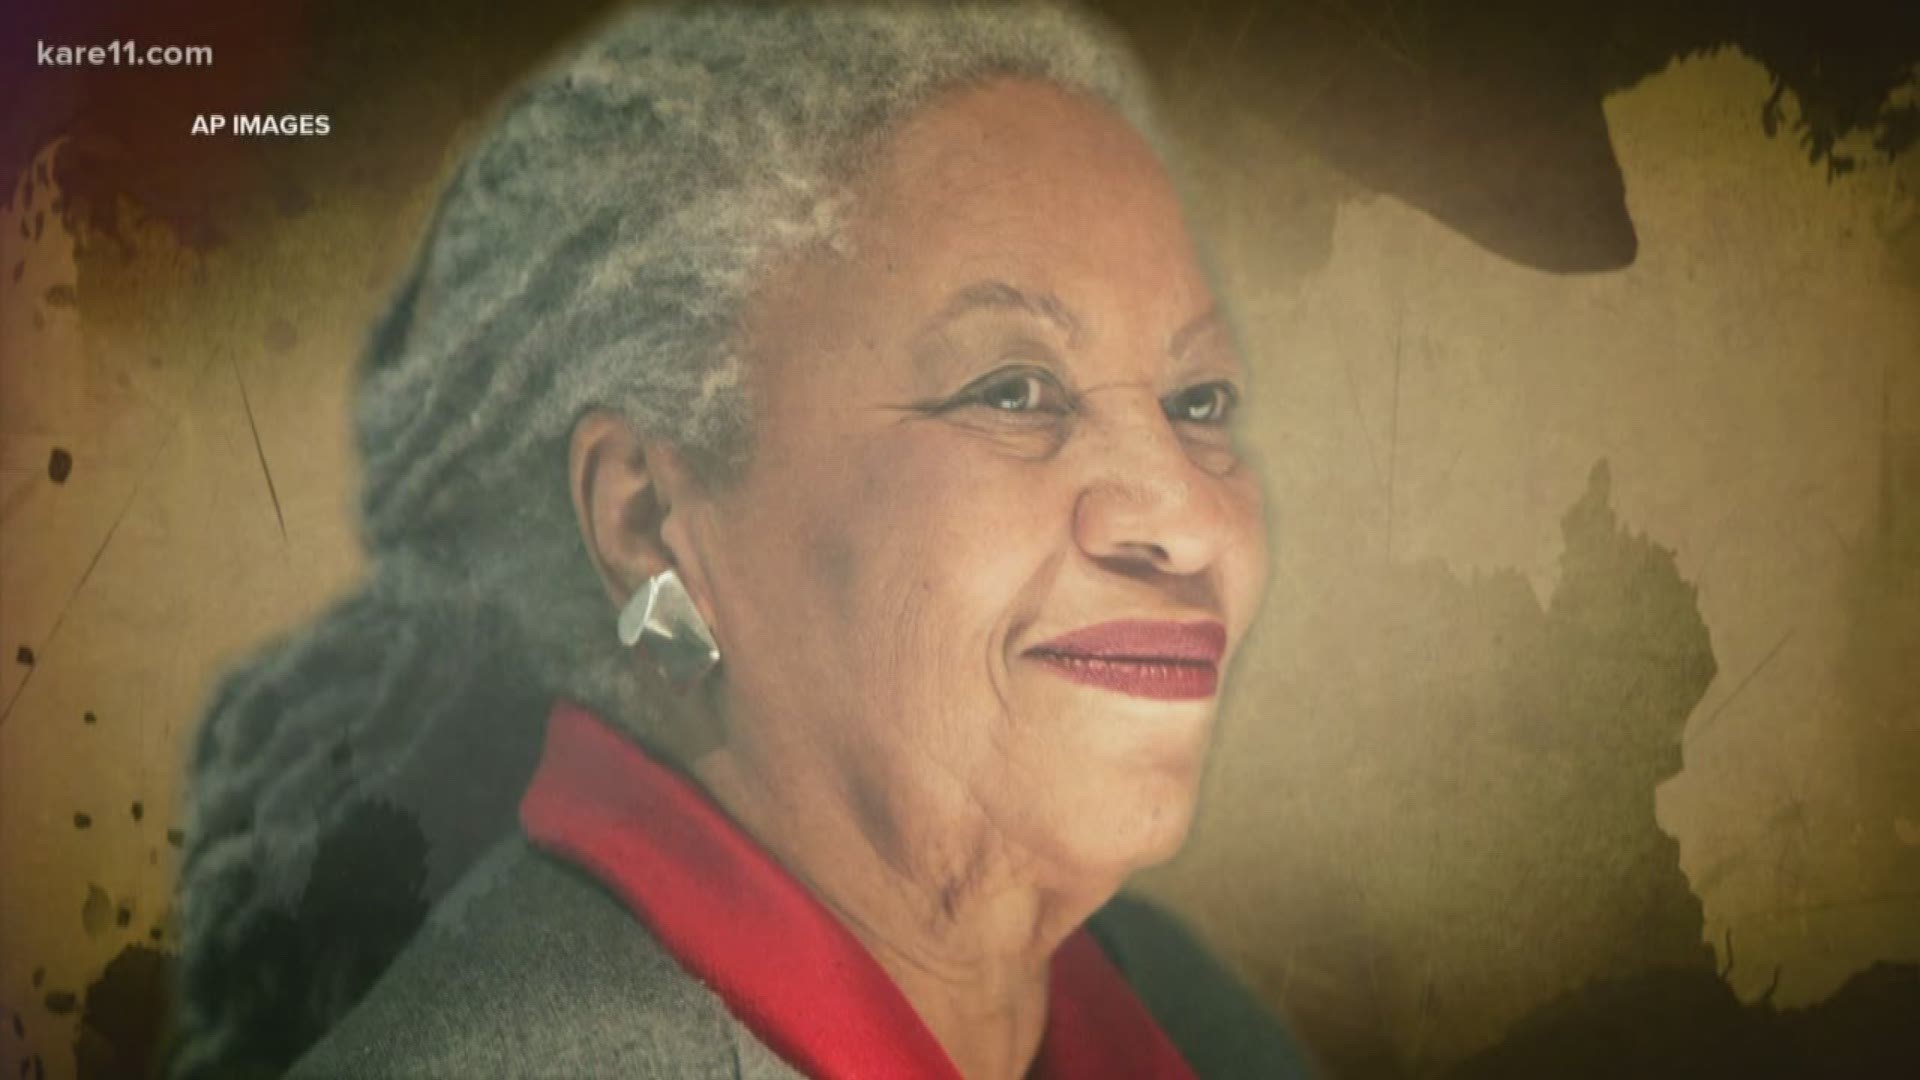 Toni Morrison was the first black woman from any country in the world to be awarded the Nobel Prize for Literature.